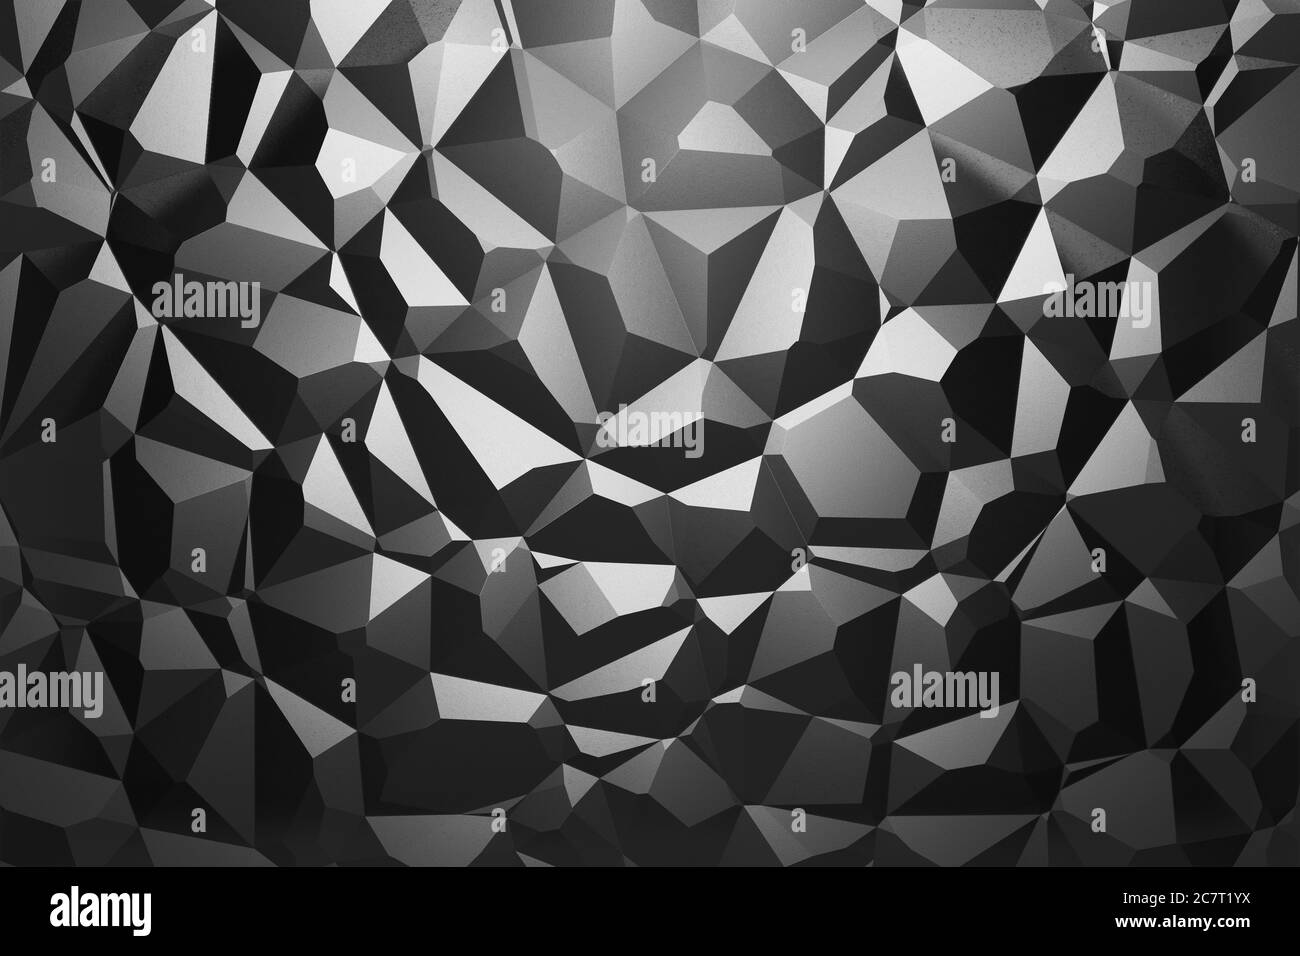 3D Gray metallic, pattern, asymmetric and geometric abstract shapes on textured Background. High quality 3d illustration Stock Photo